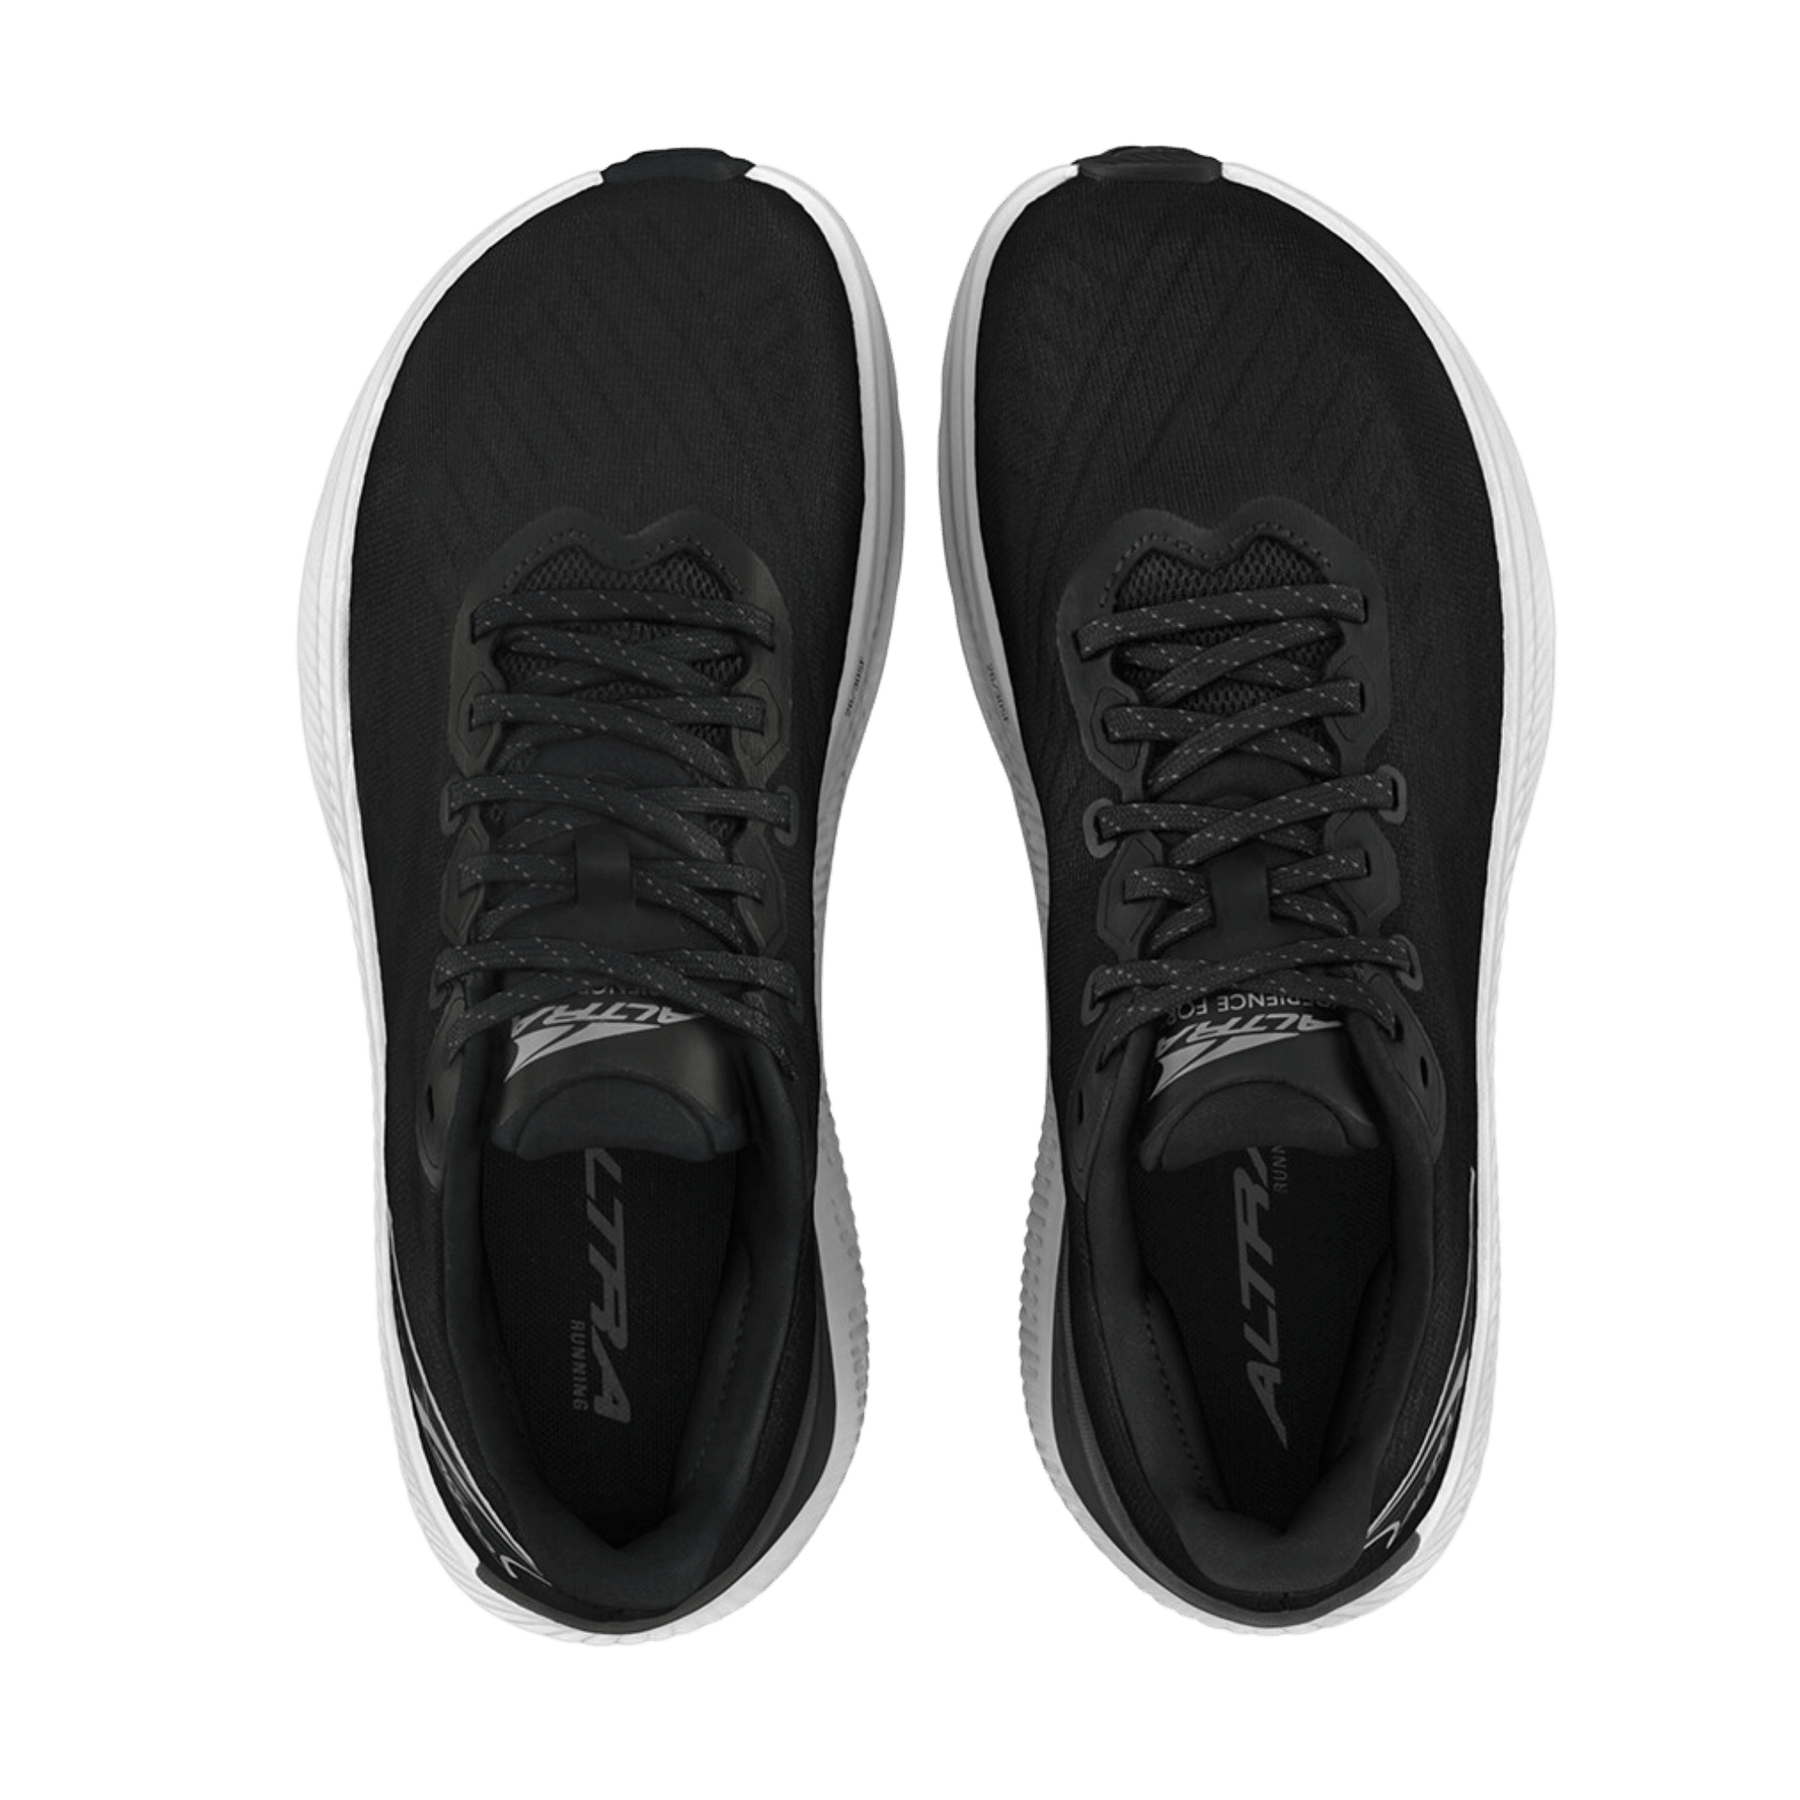 ALTRA WOMEN'S EXPERIENCE FORM